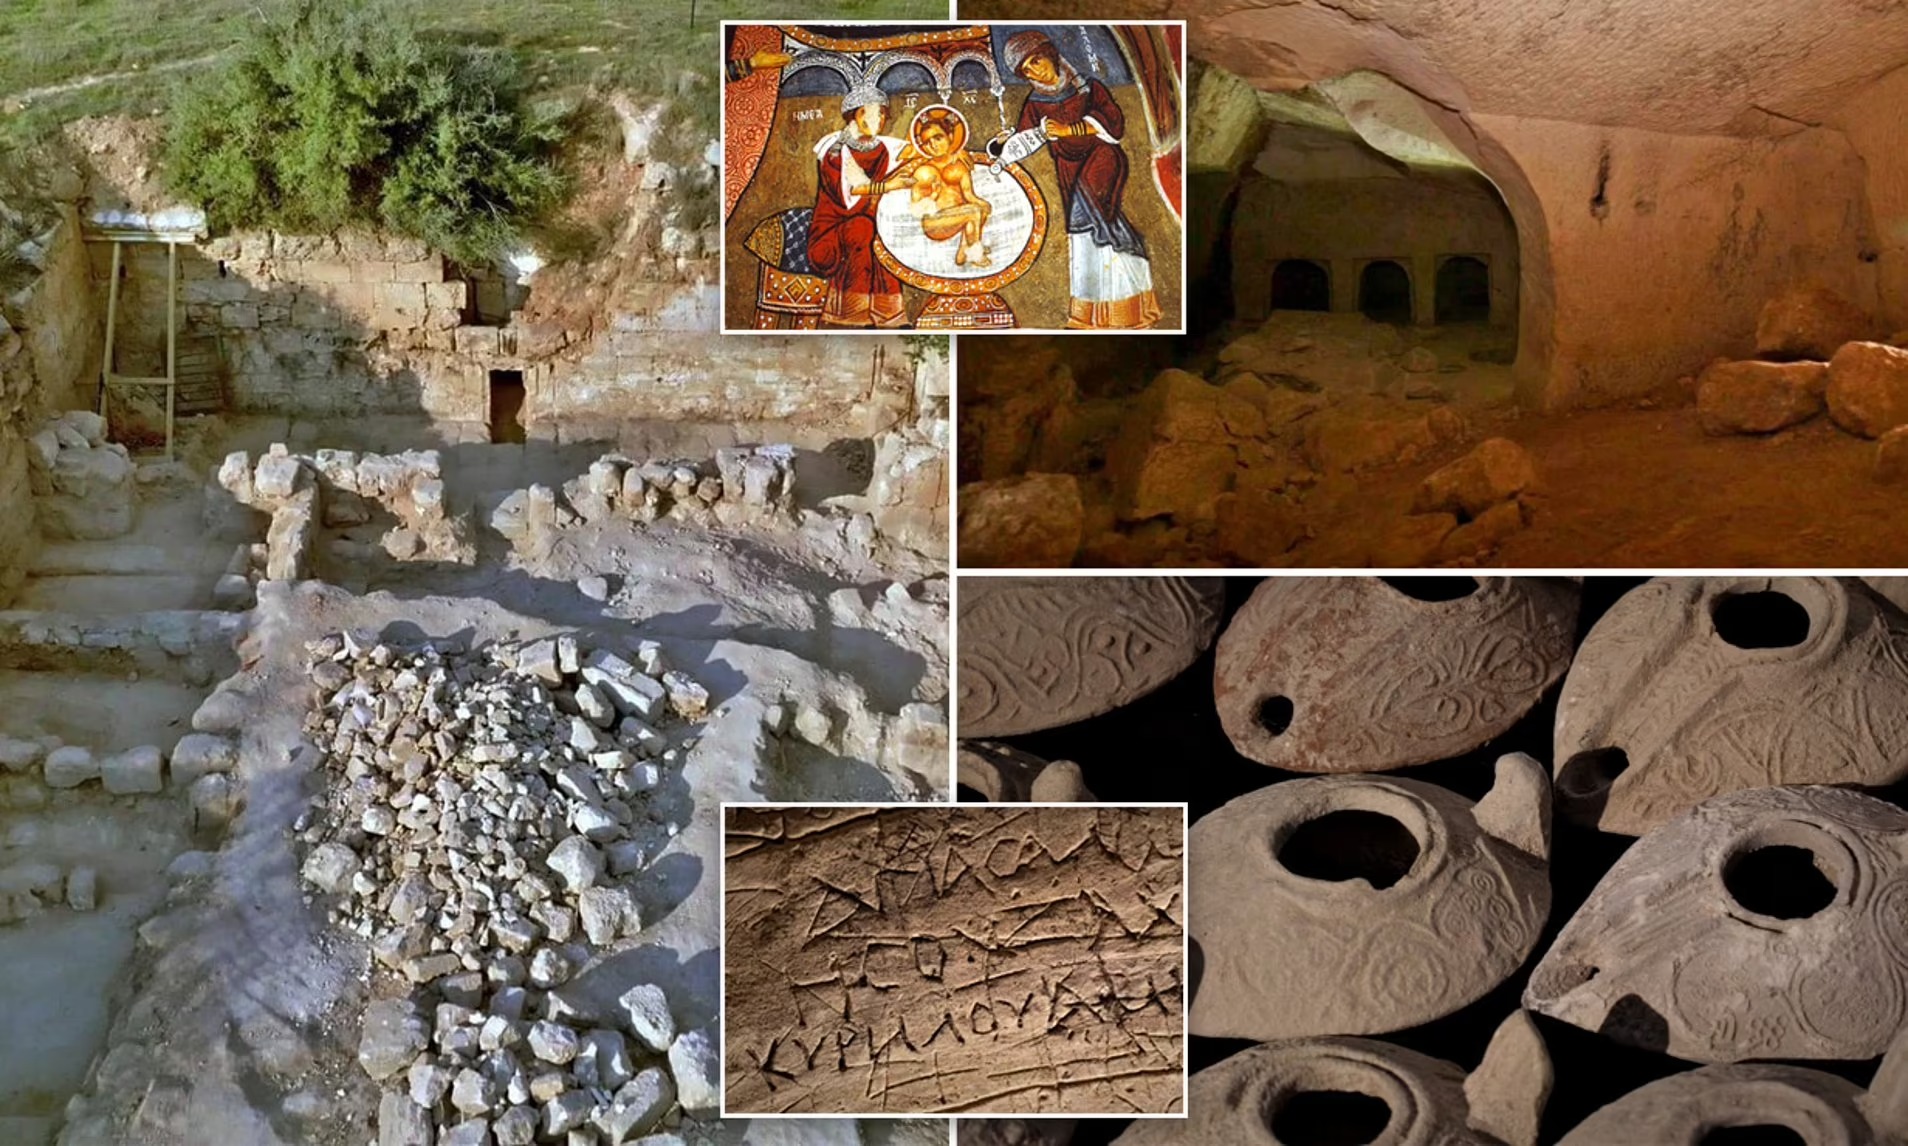 2000-YEAR-OLD BURIAL CAVE LINKED TO SALOME FROM NATIVITY